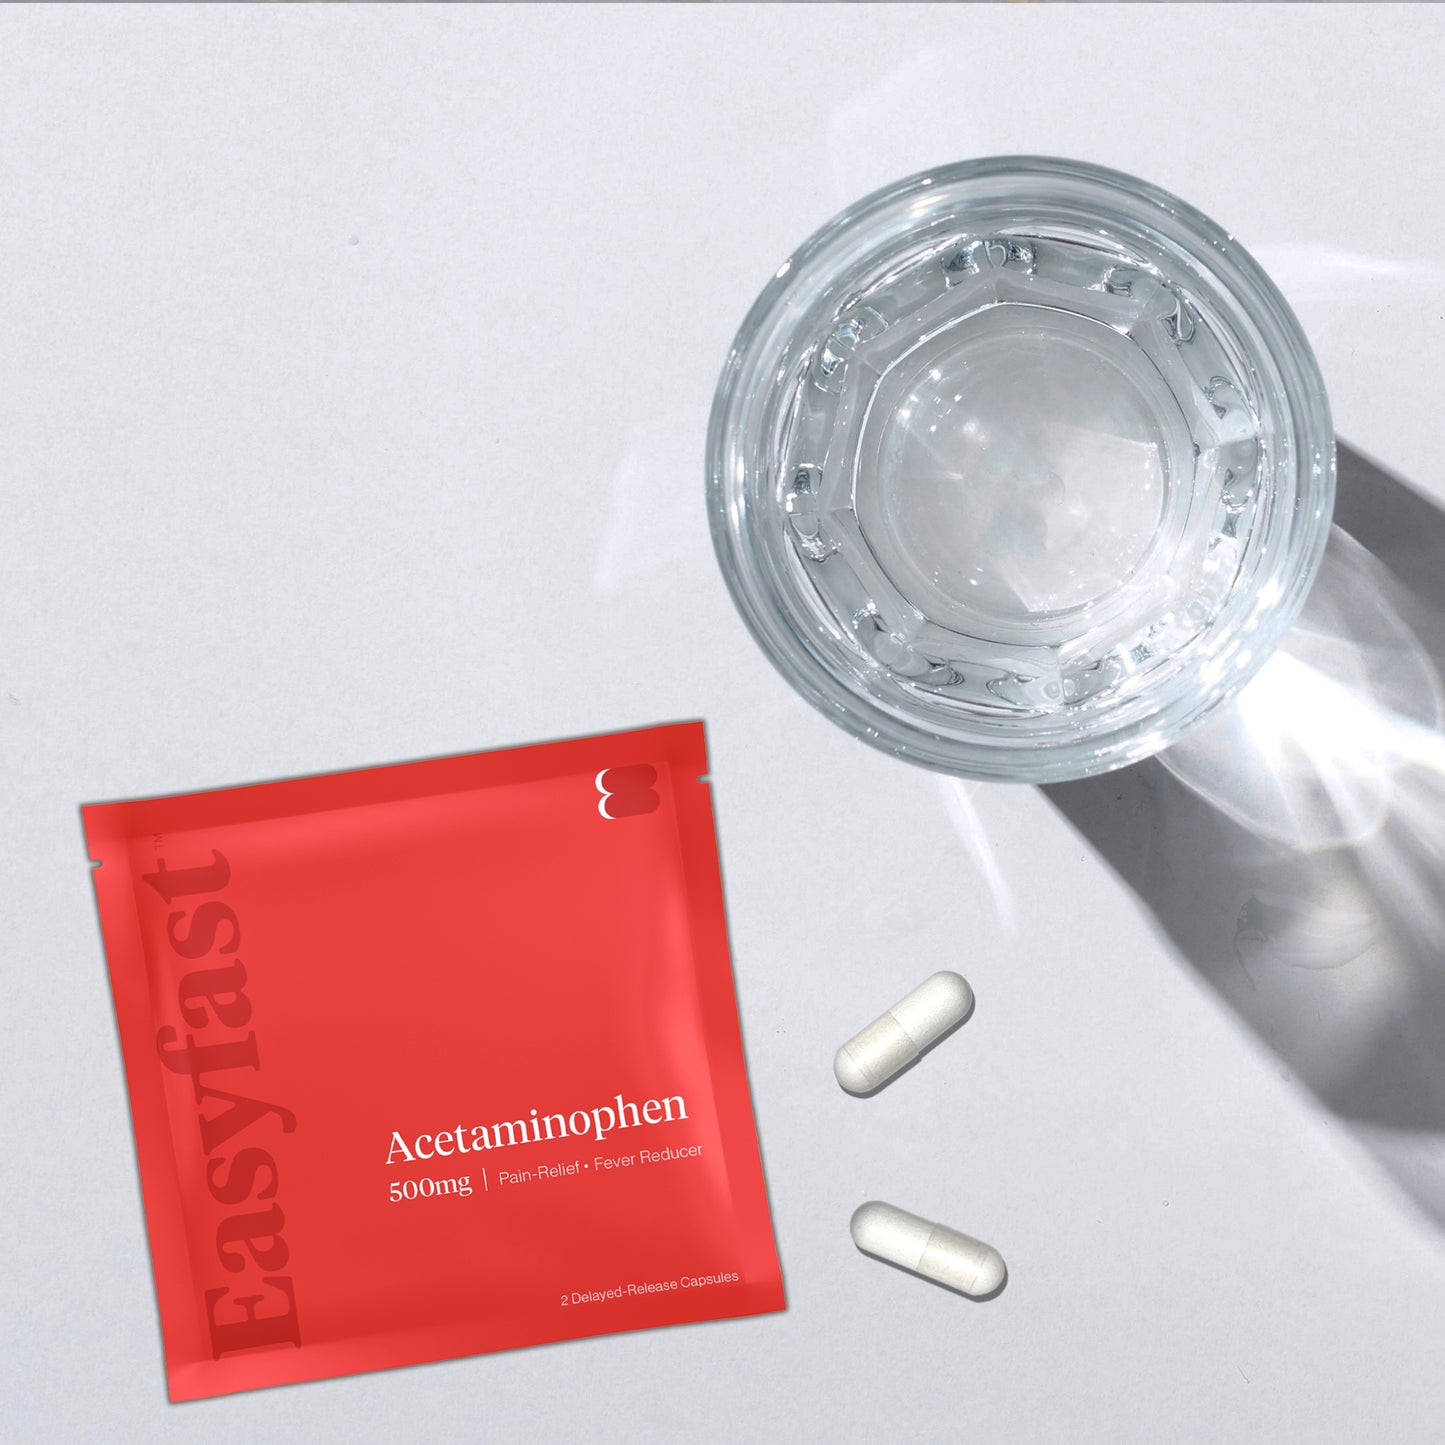 Time-Release Acetaminophen